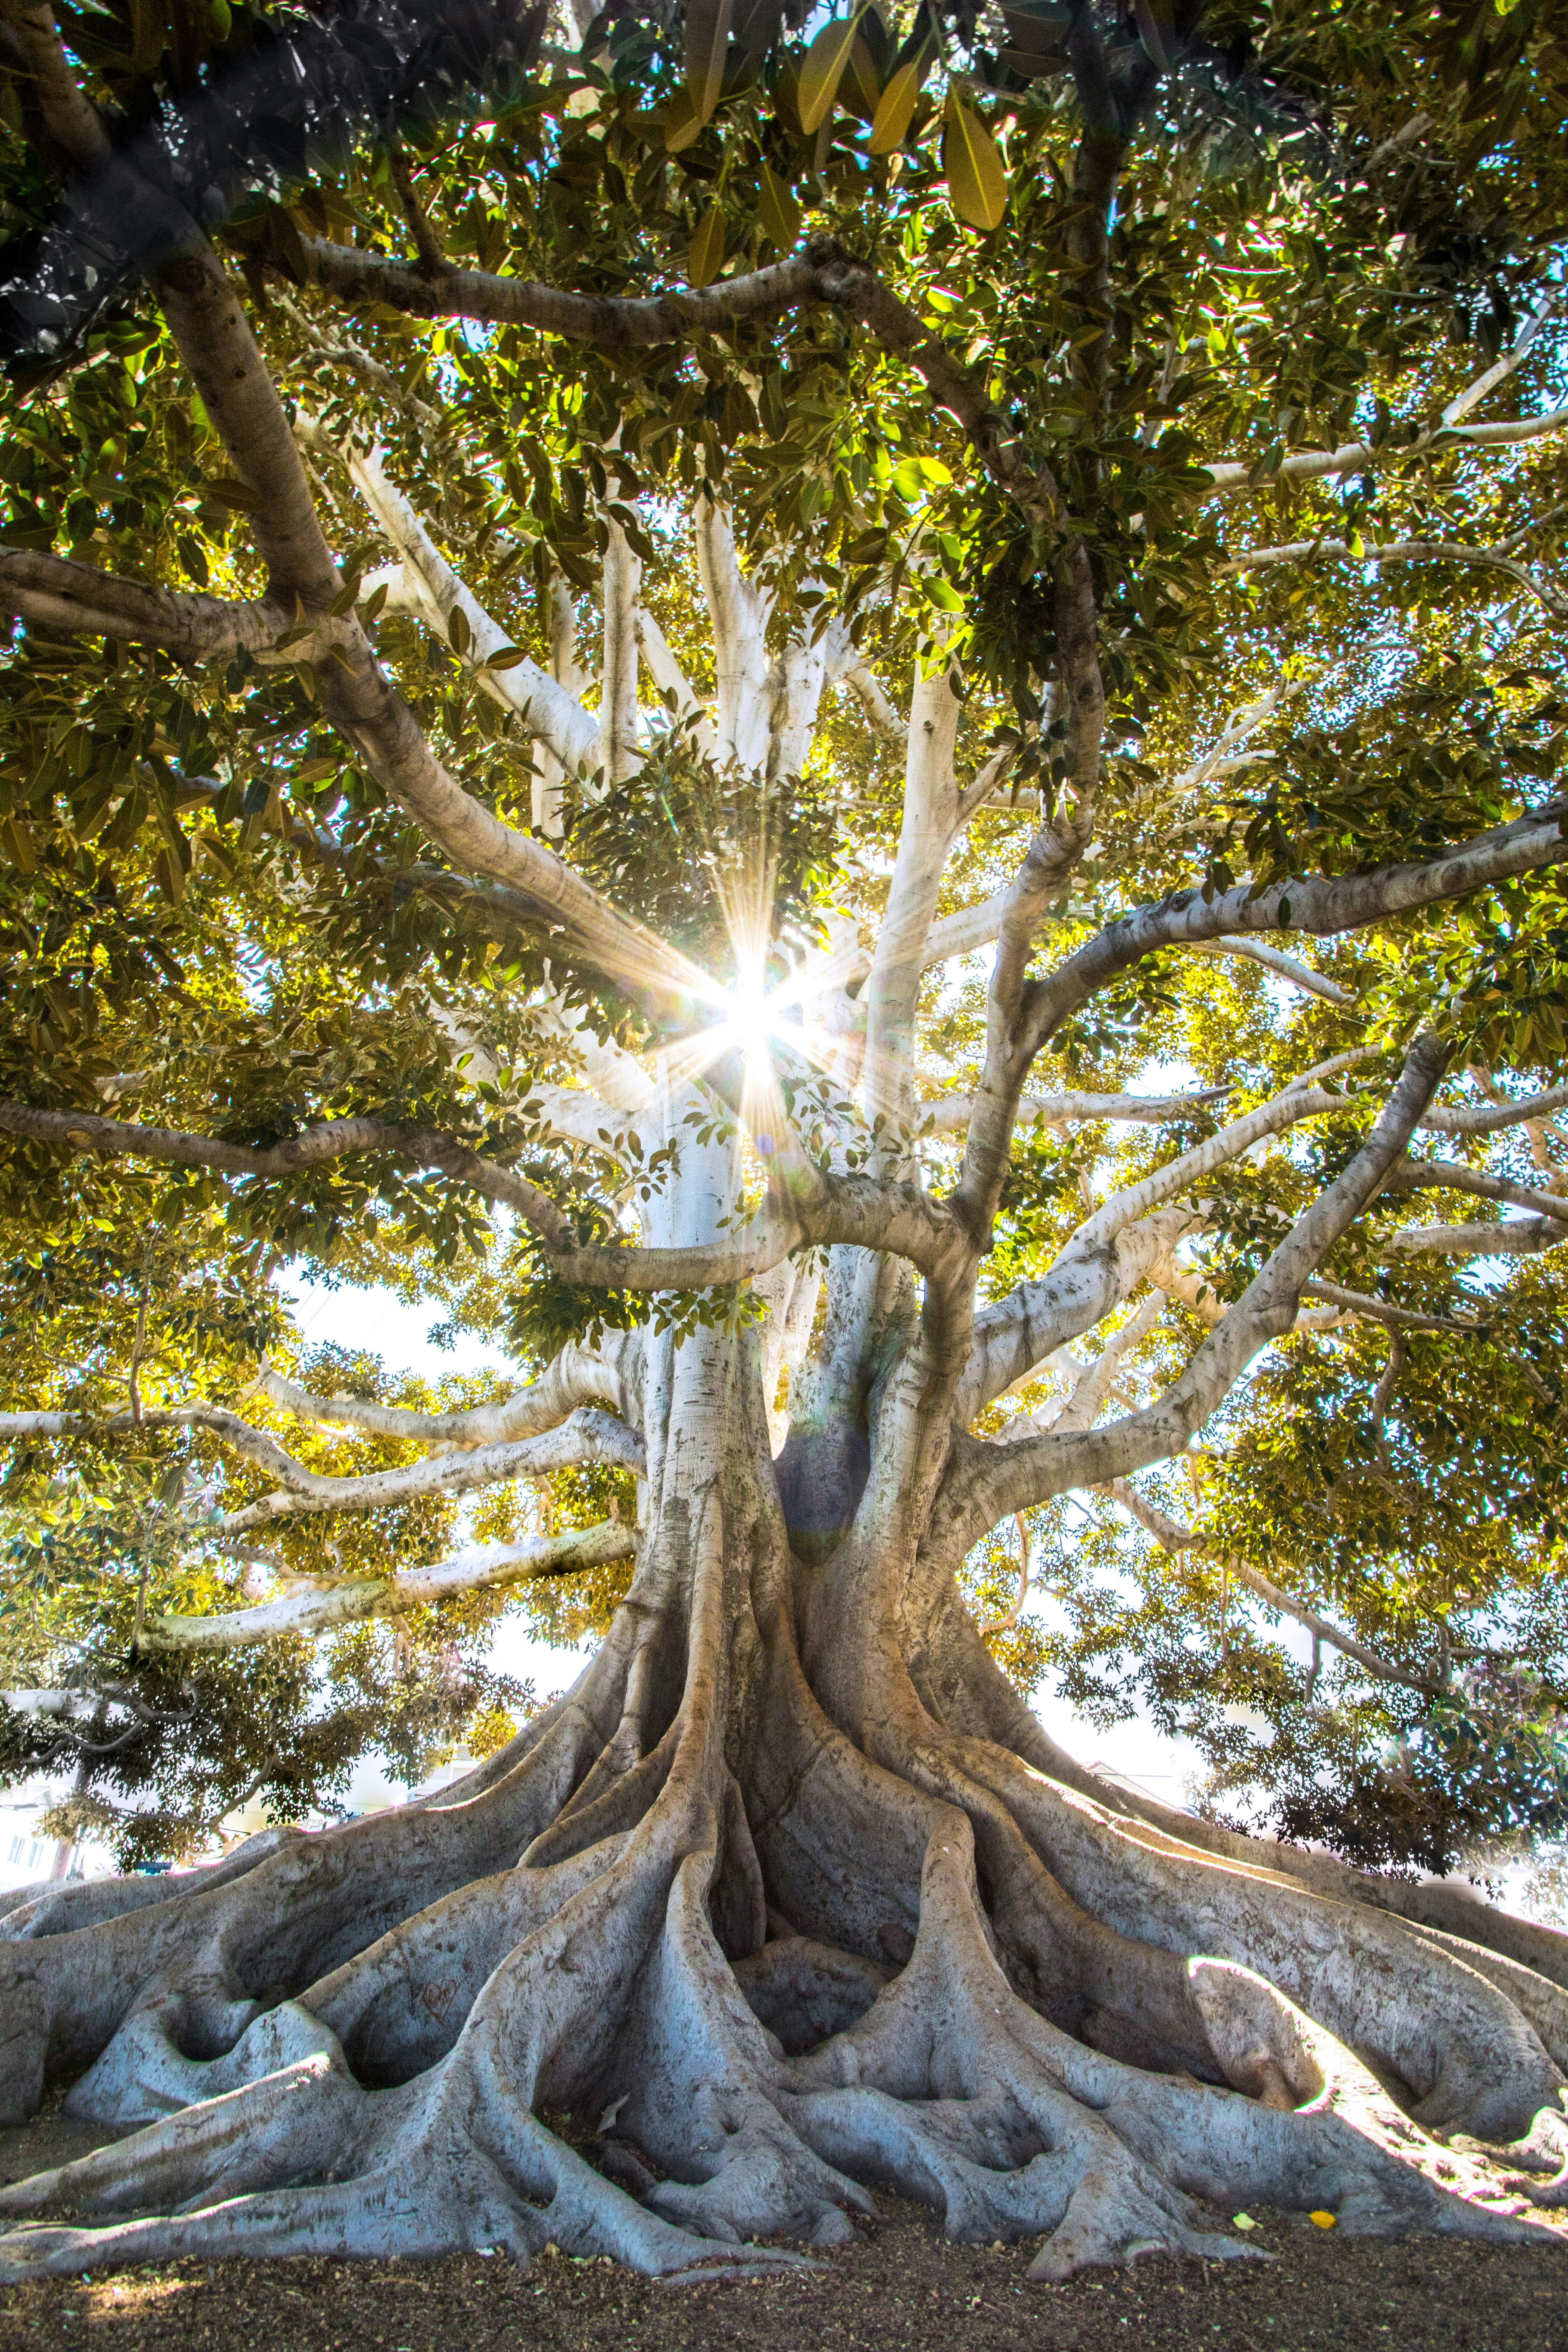 Large tree with many exposed roots, gorgeous canopy of wide, leafy branches with the sun peaking through